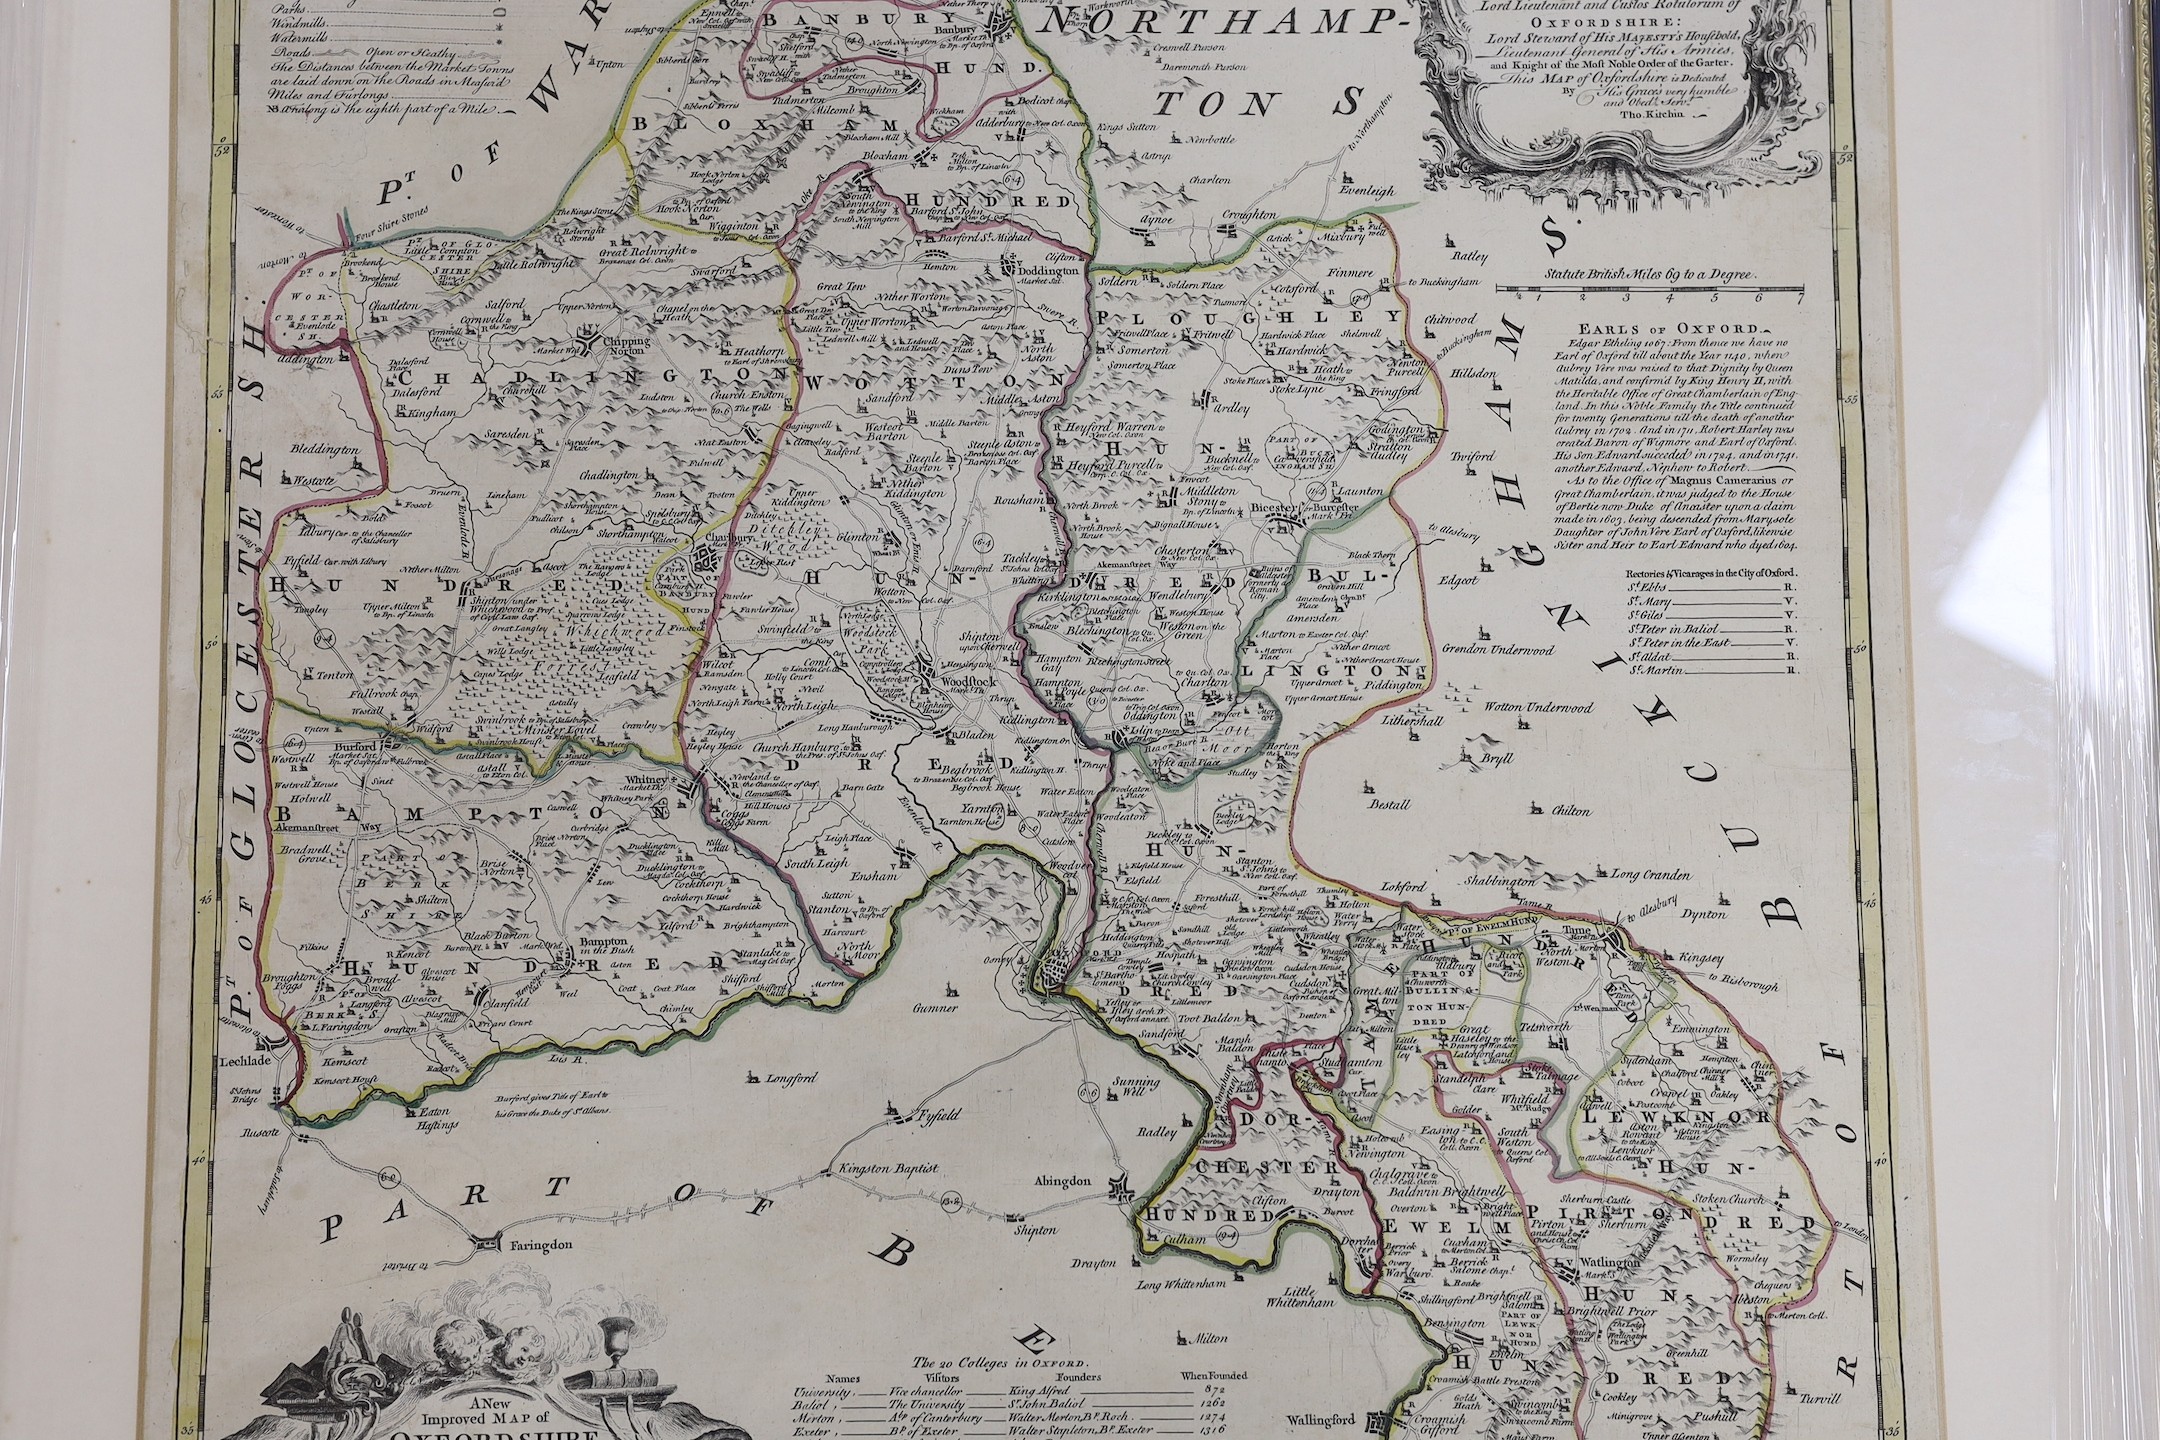 Thomas Kitchin, coloured engraving, A New and Improved Map of Oxfordshire, sold by J. Hinton, London, 1750, 72 x 54cm